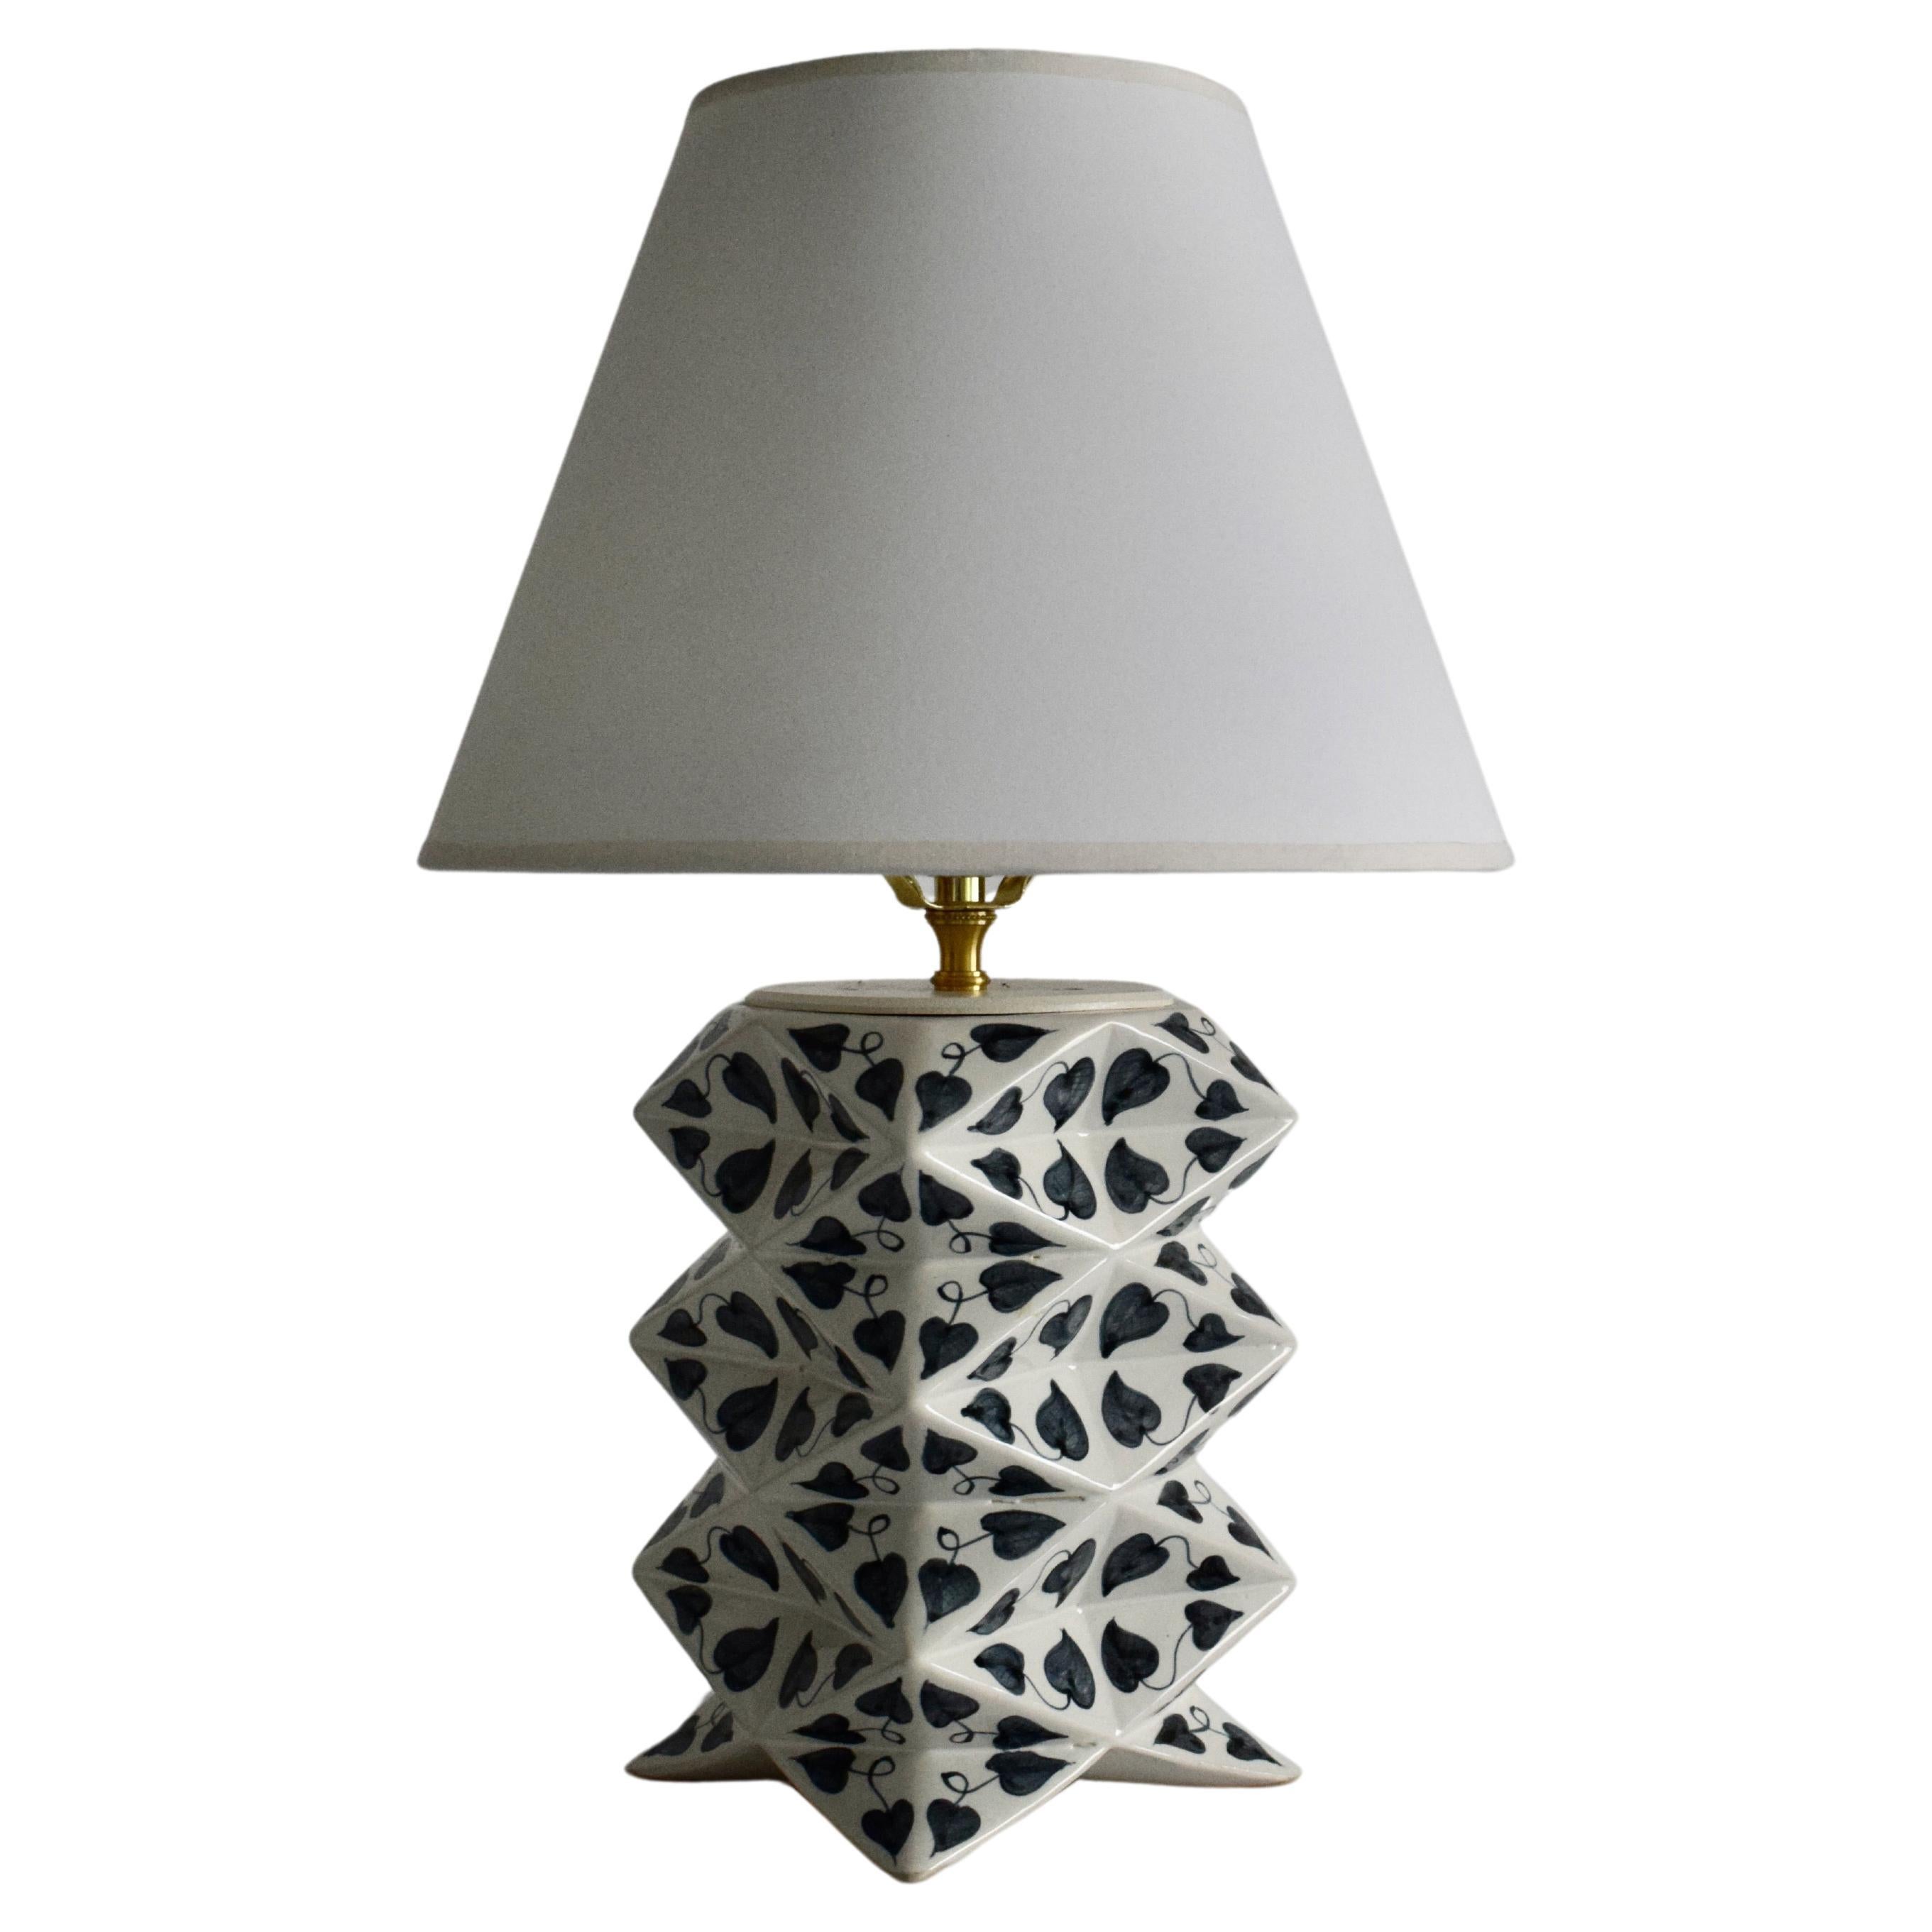 Hand-painted Ceramic Vietnamese Leaves Origami Table Lamp by James Hicks For Sale